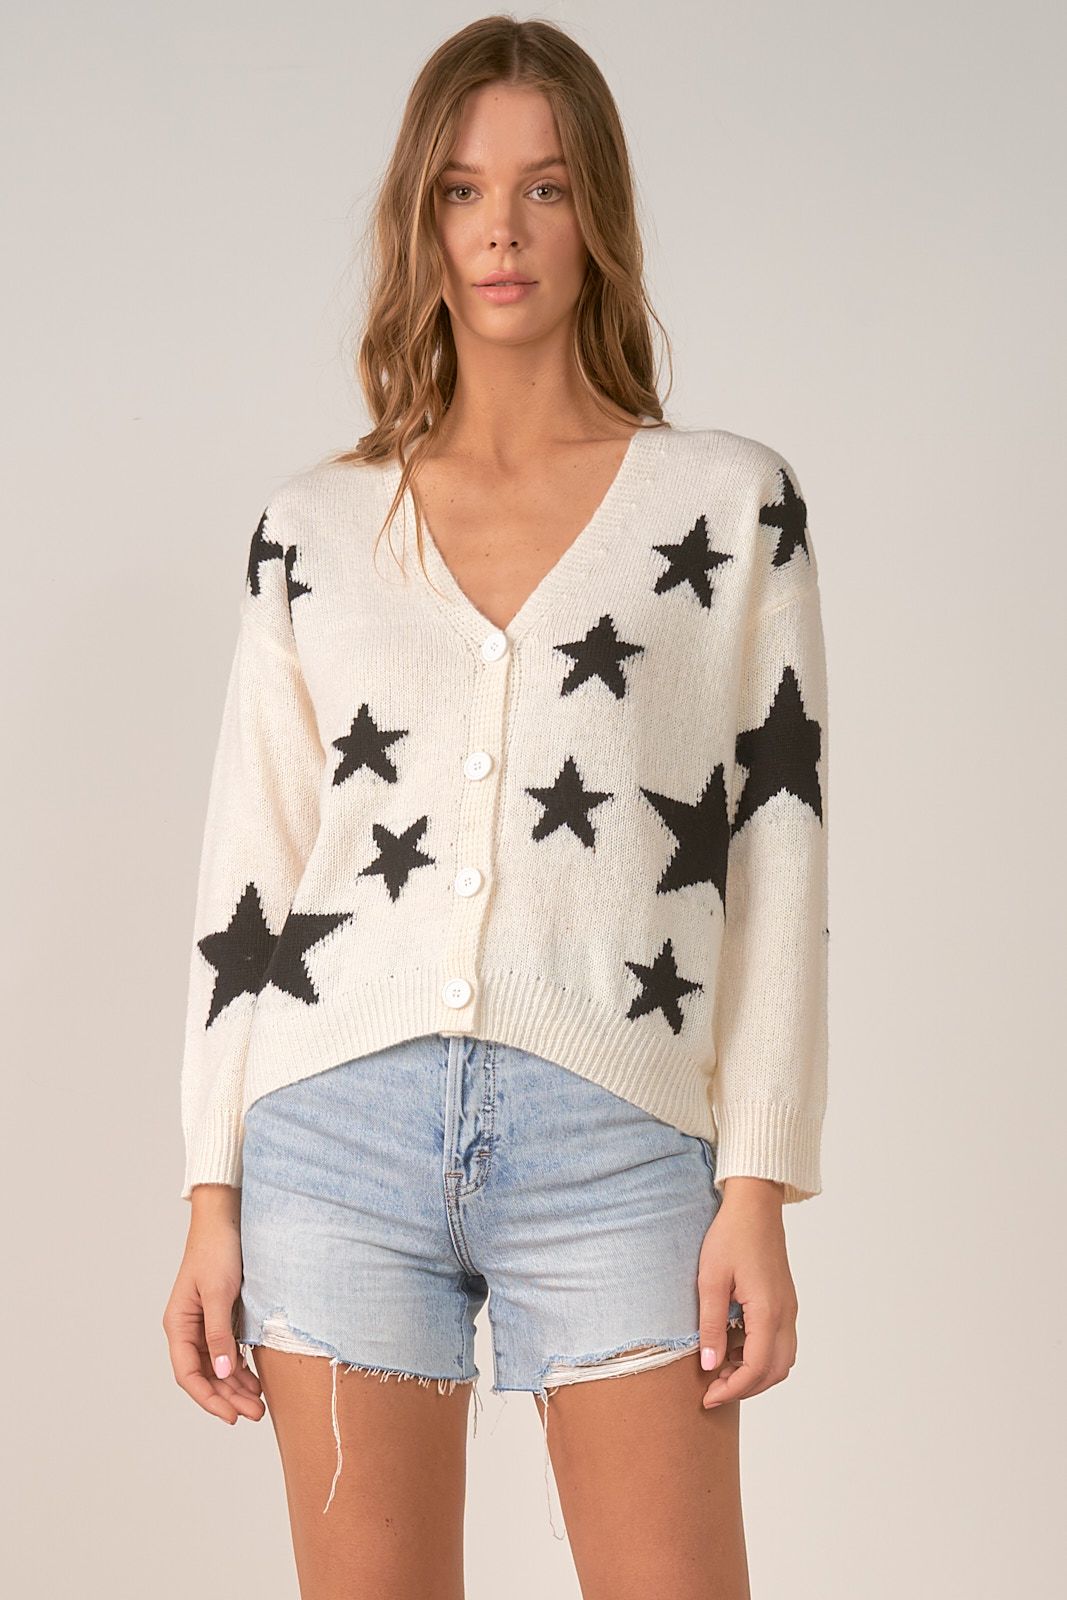 V-NECK STAR BUTTON CARDIGAN - Kingfisher Road - Online Boutique